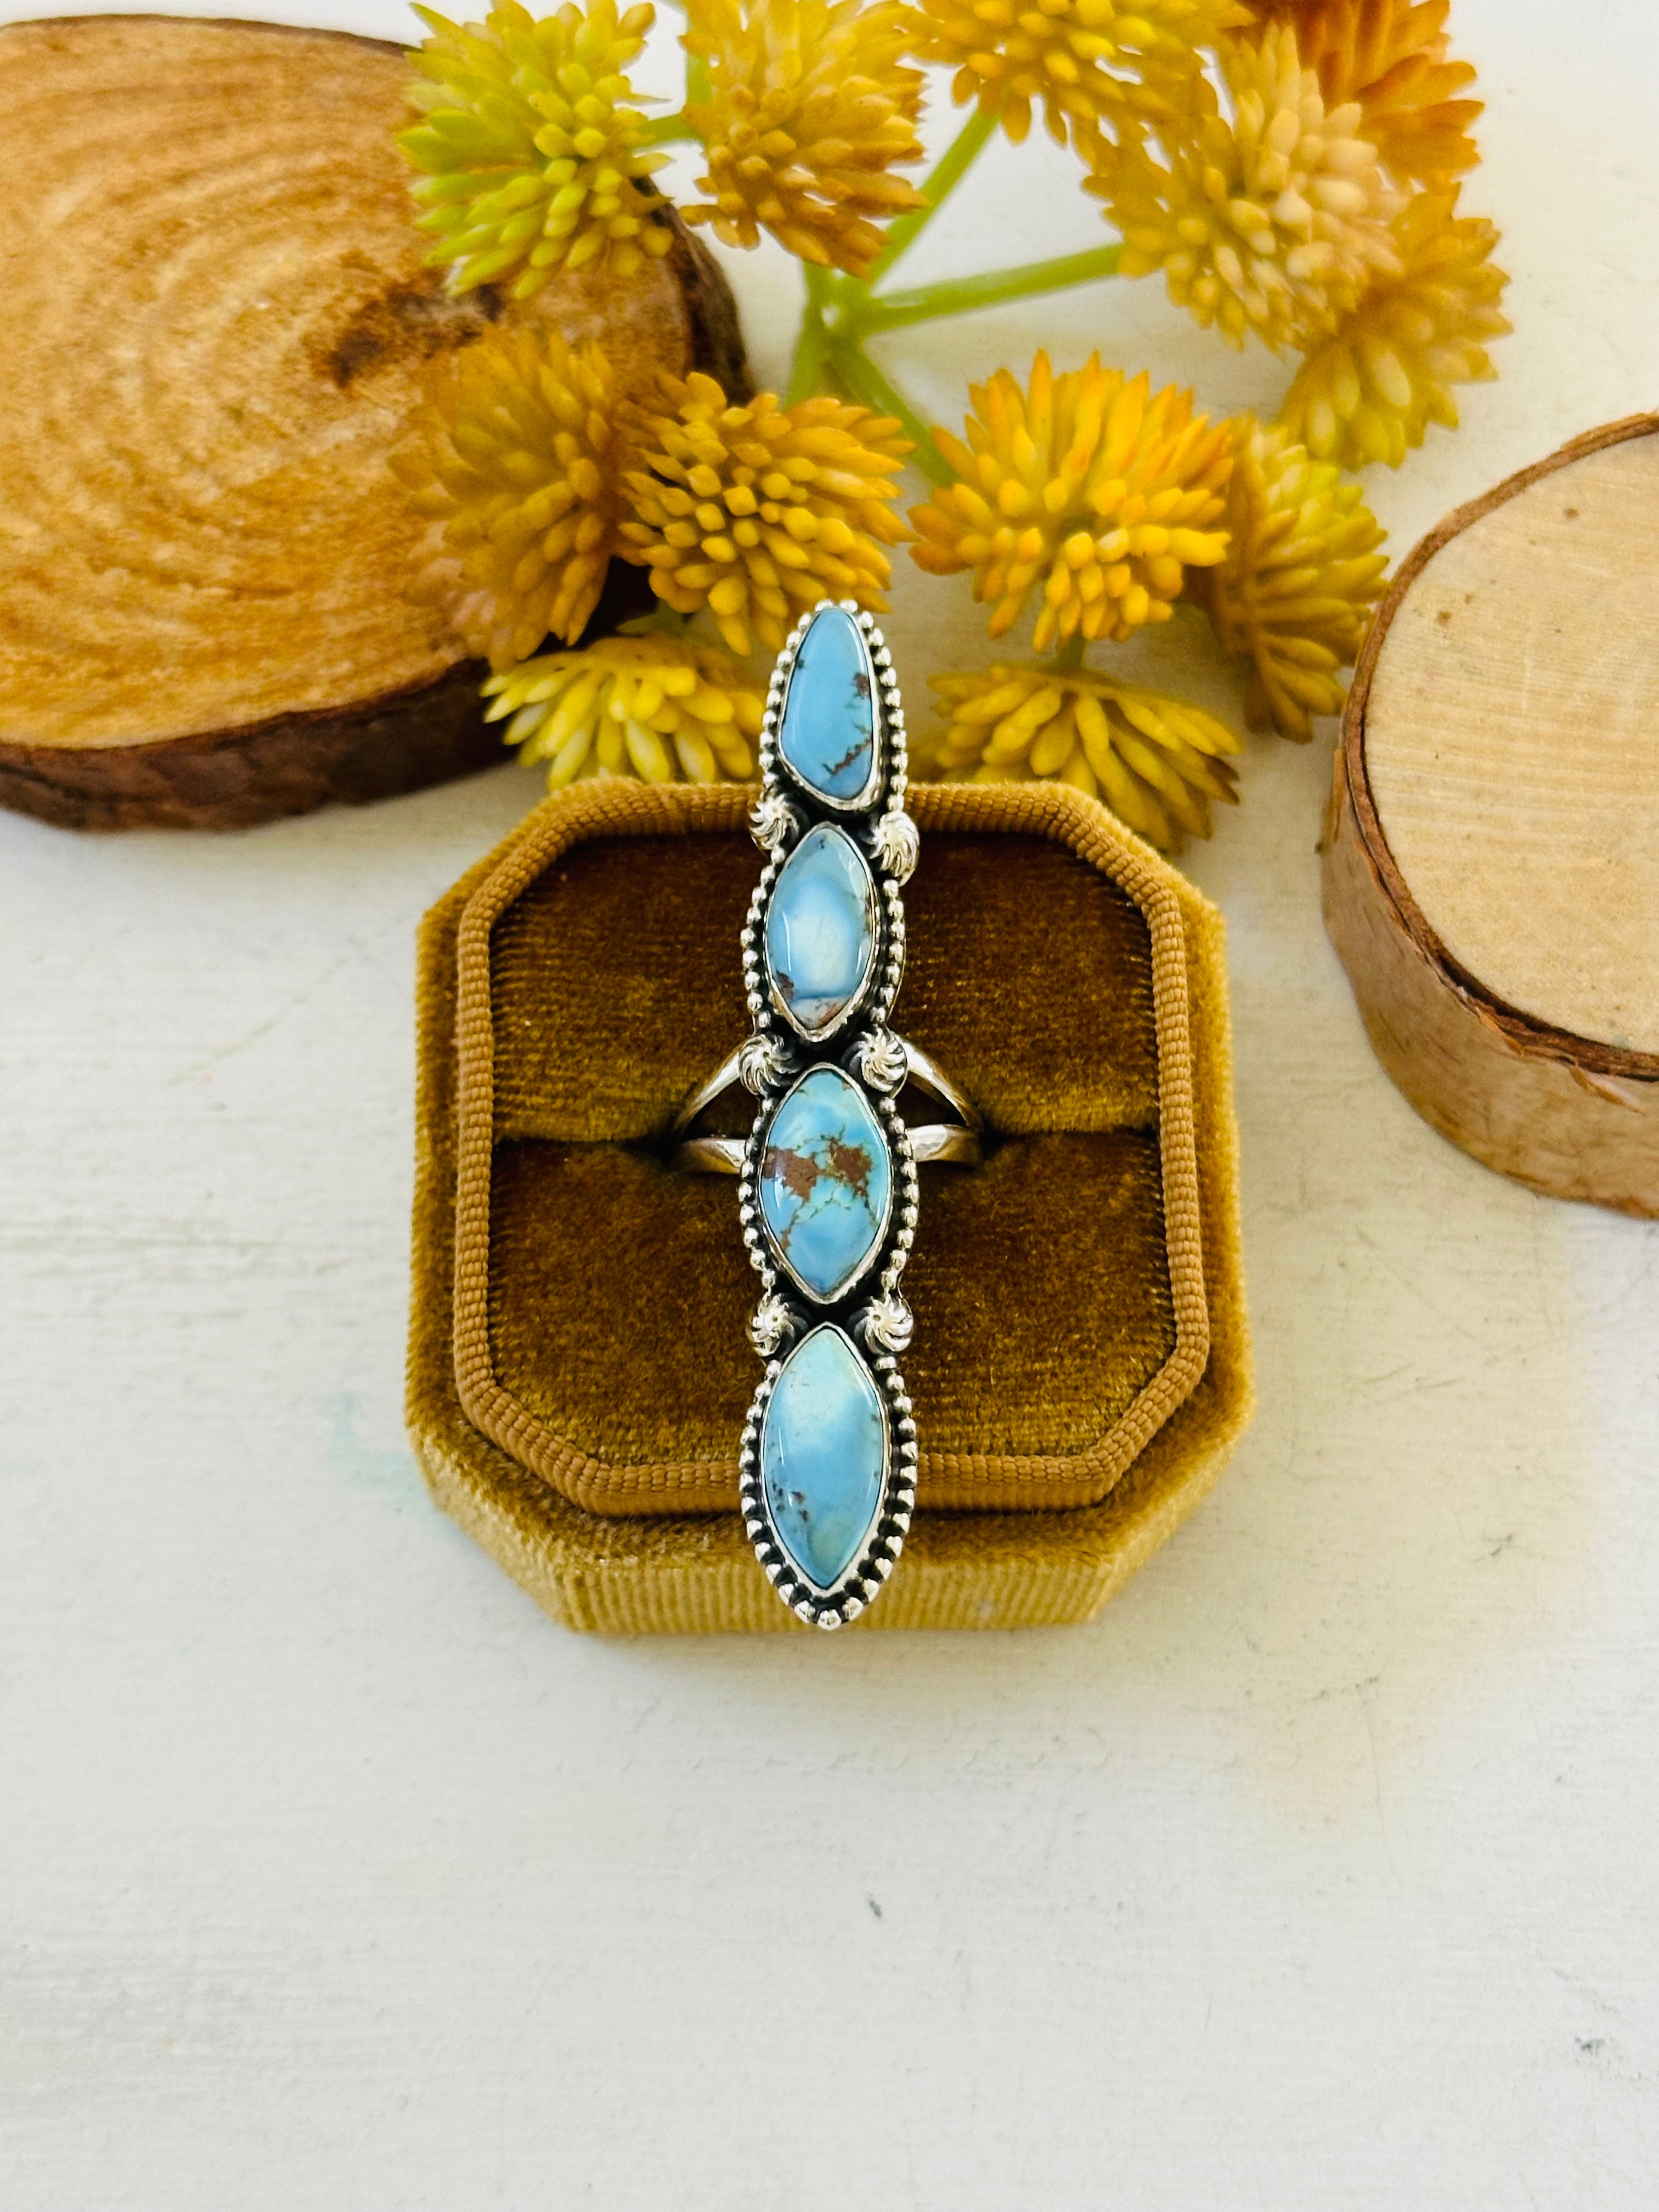 Southwest Handmade Golden Hills Turquoise & Sterling Silver Ring Size 6